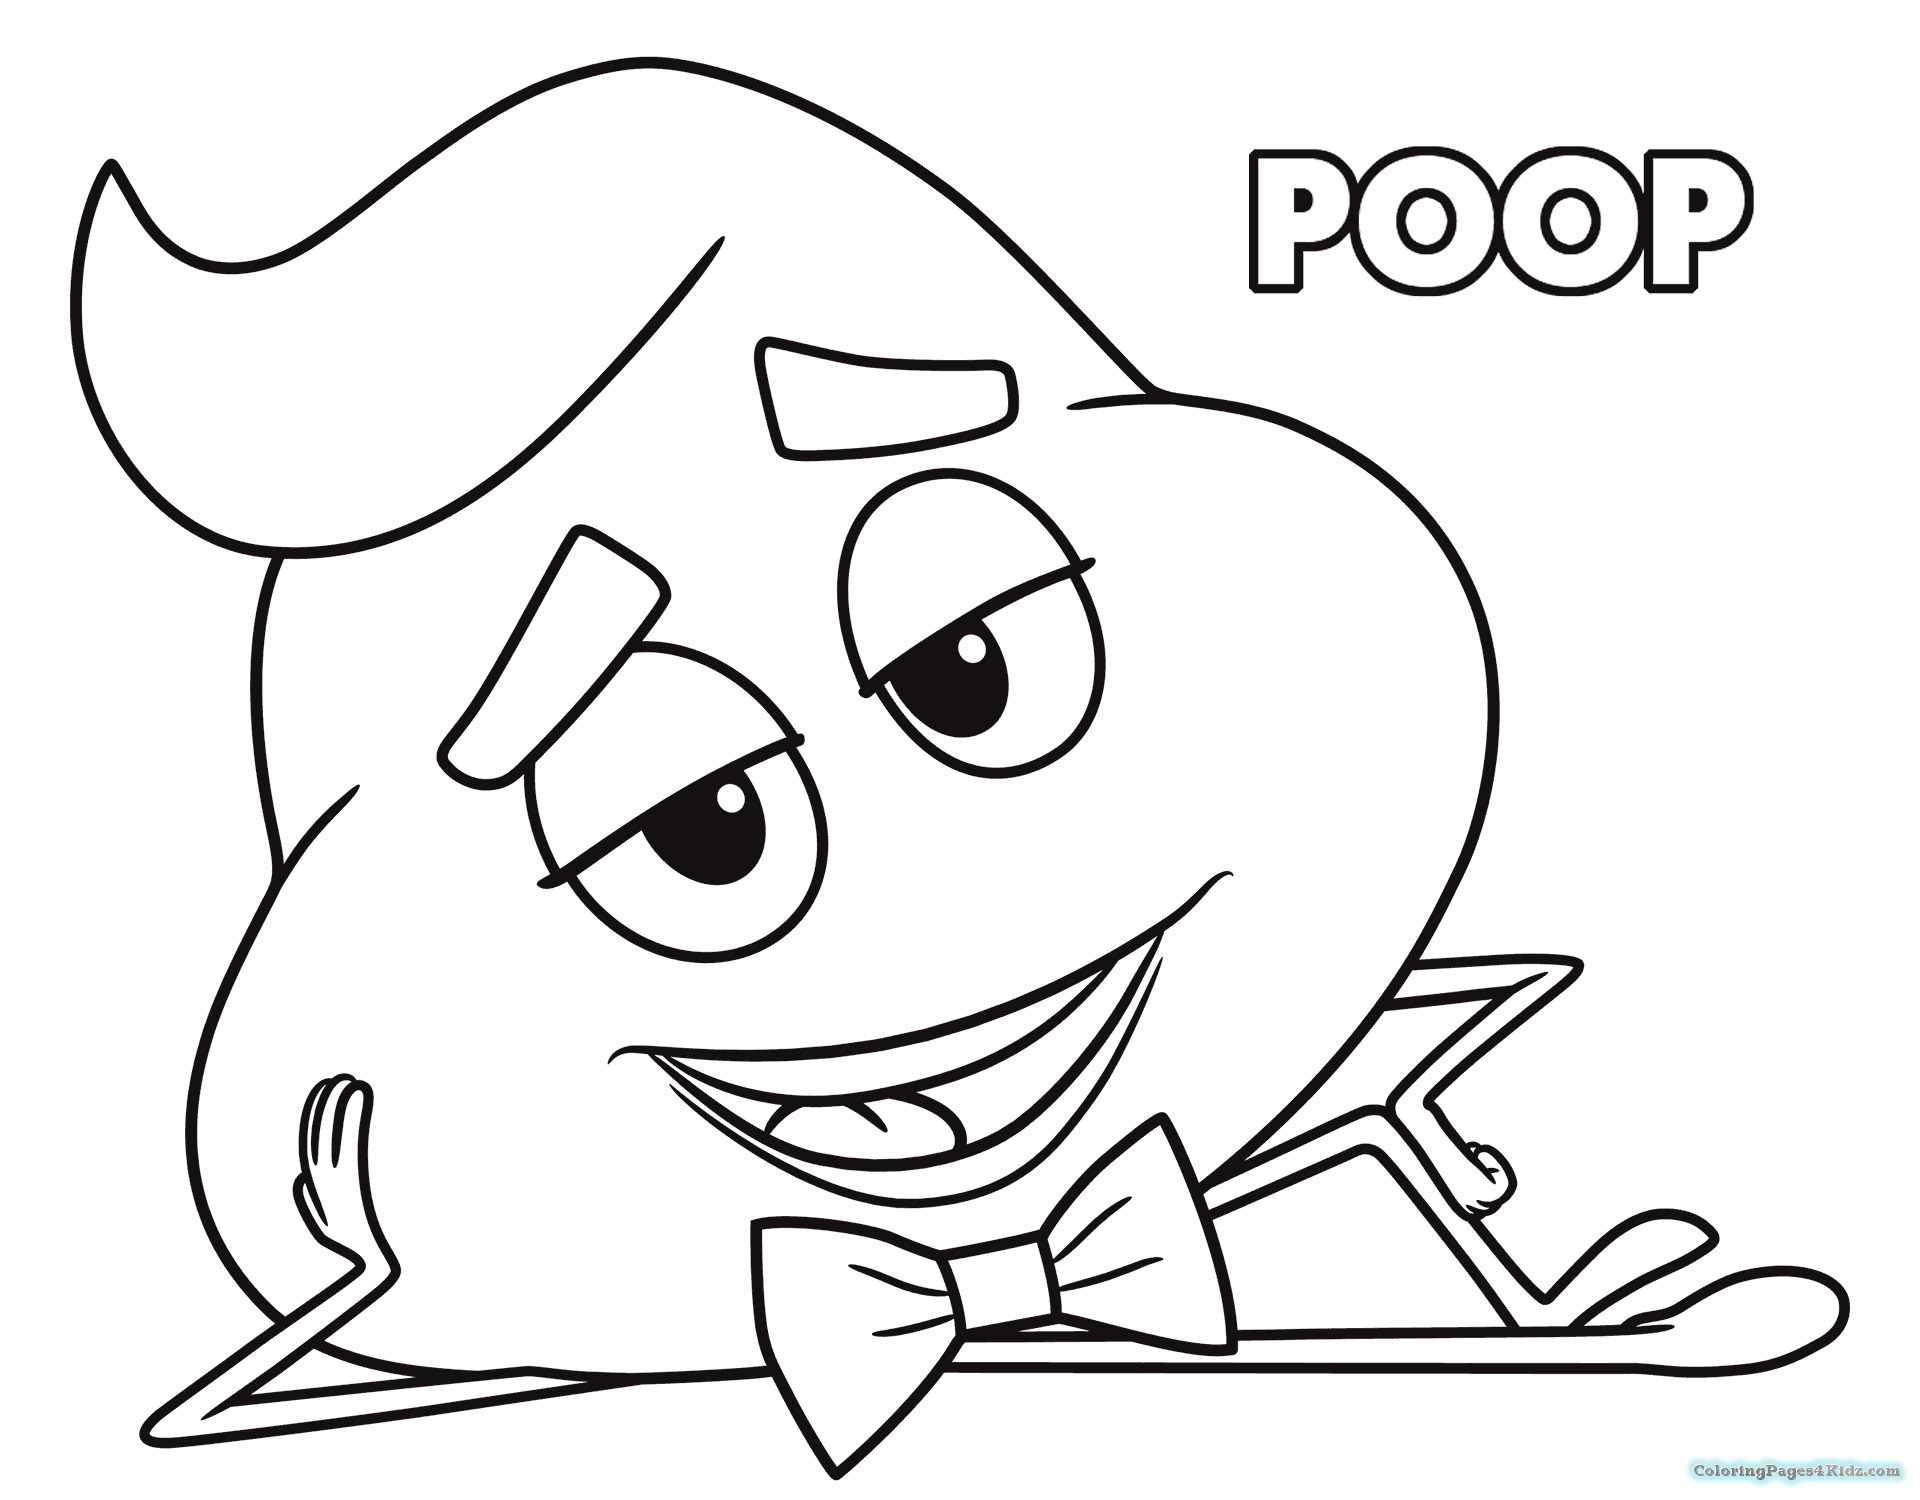 emoji-poop-coloring-pages-at-getcolorings-free-printable-colorings-pages-to-print-and-color